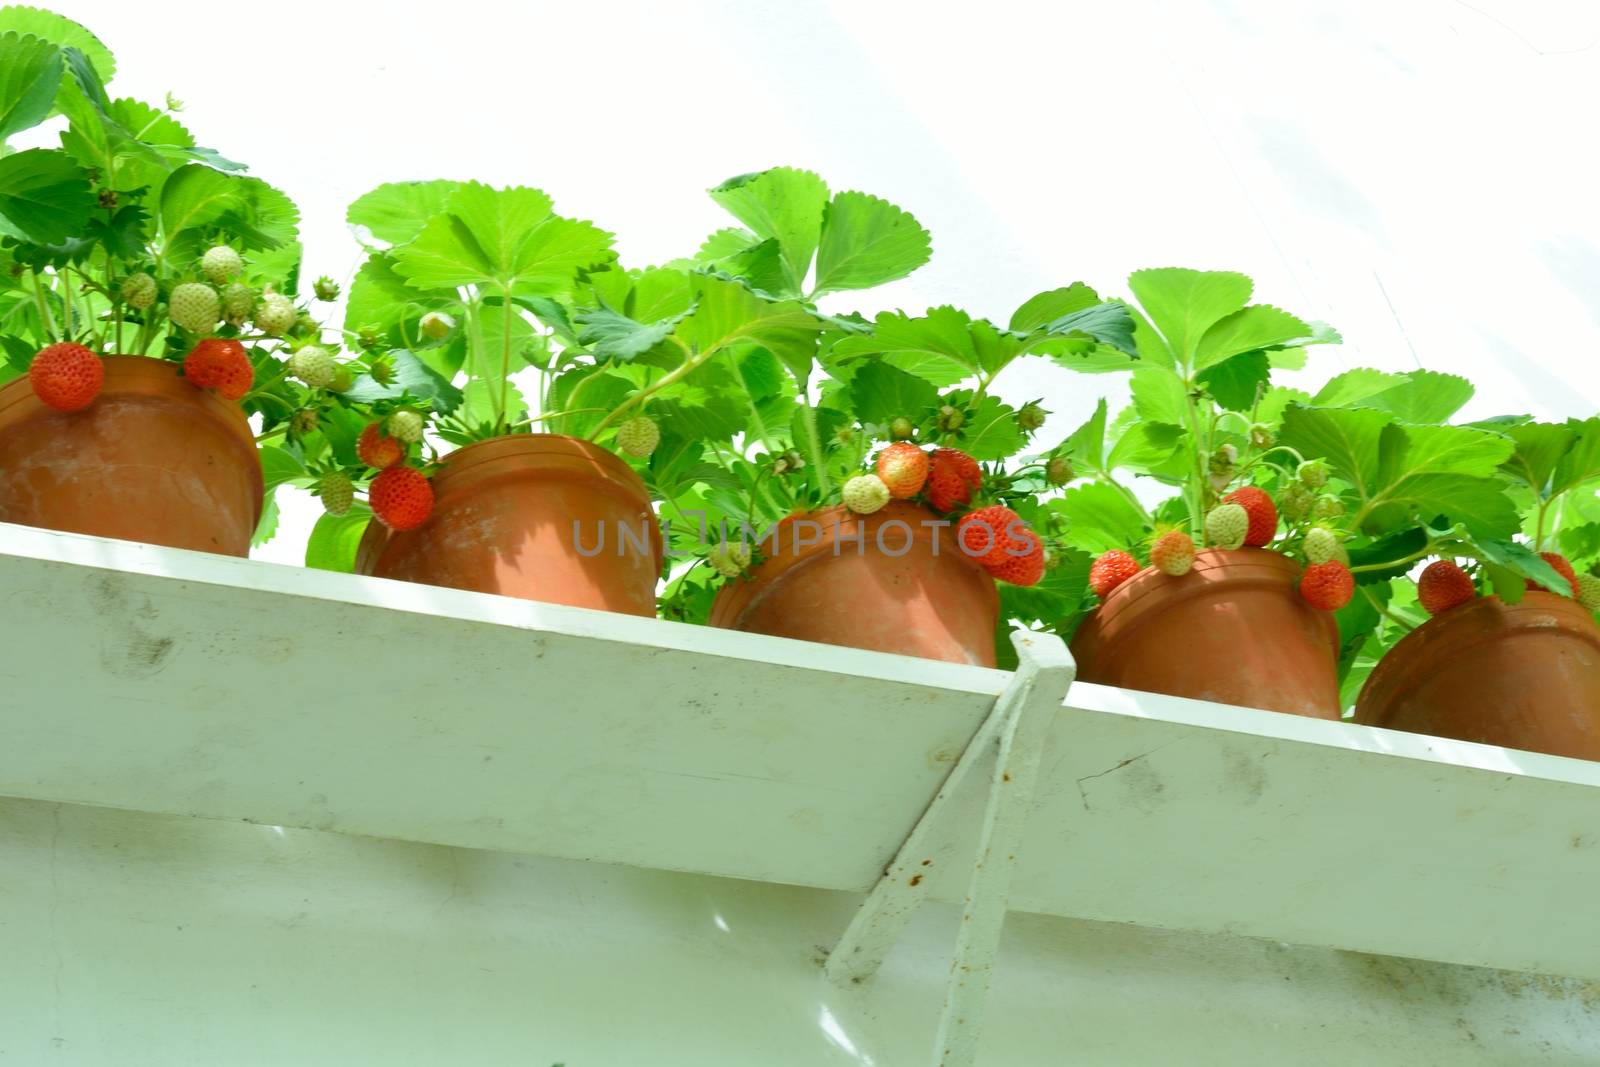 Row of Strawberry plants in Pots by pauws99